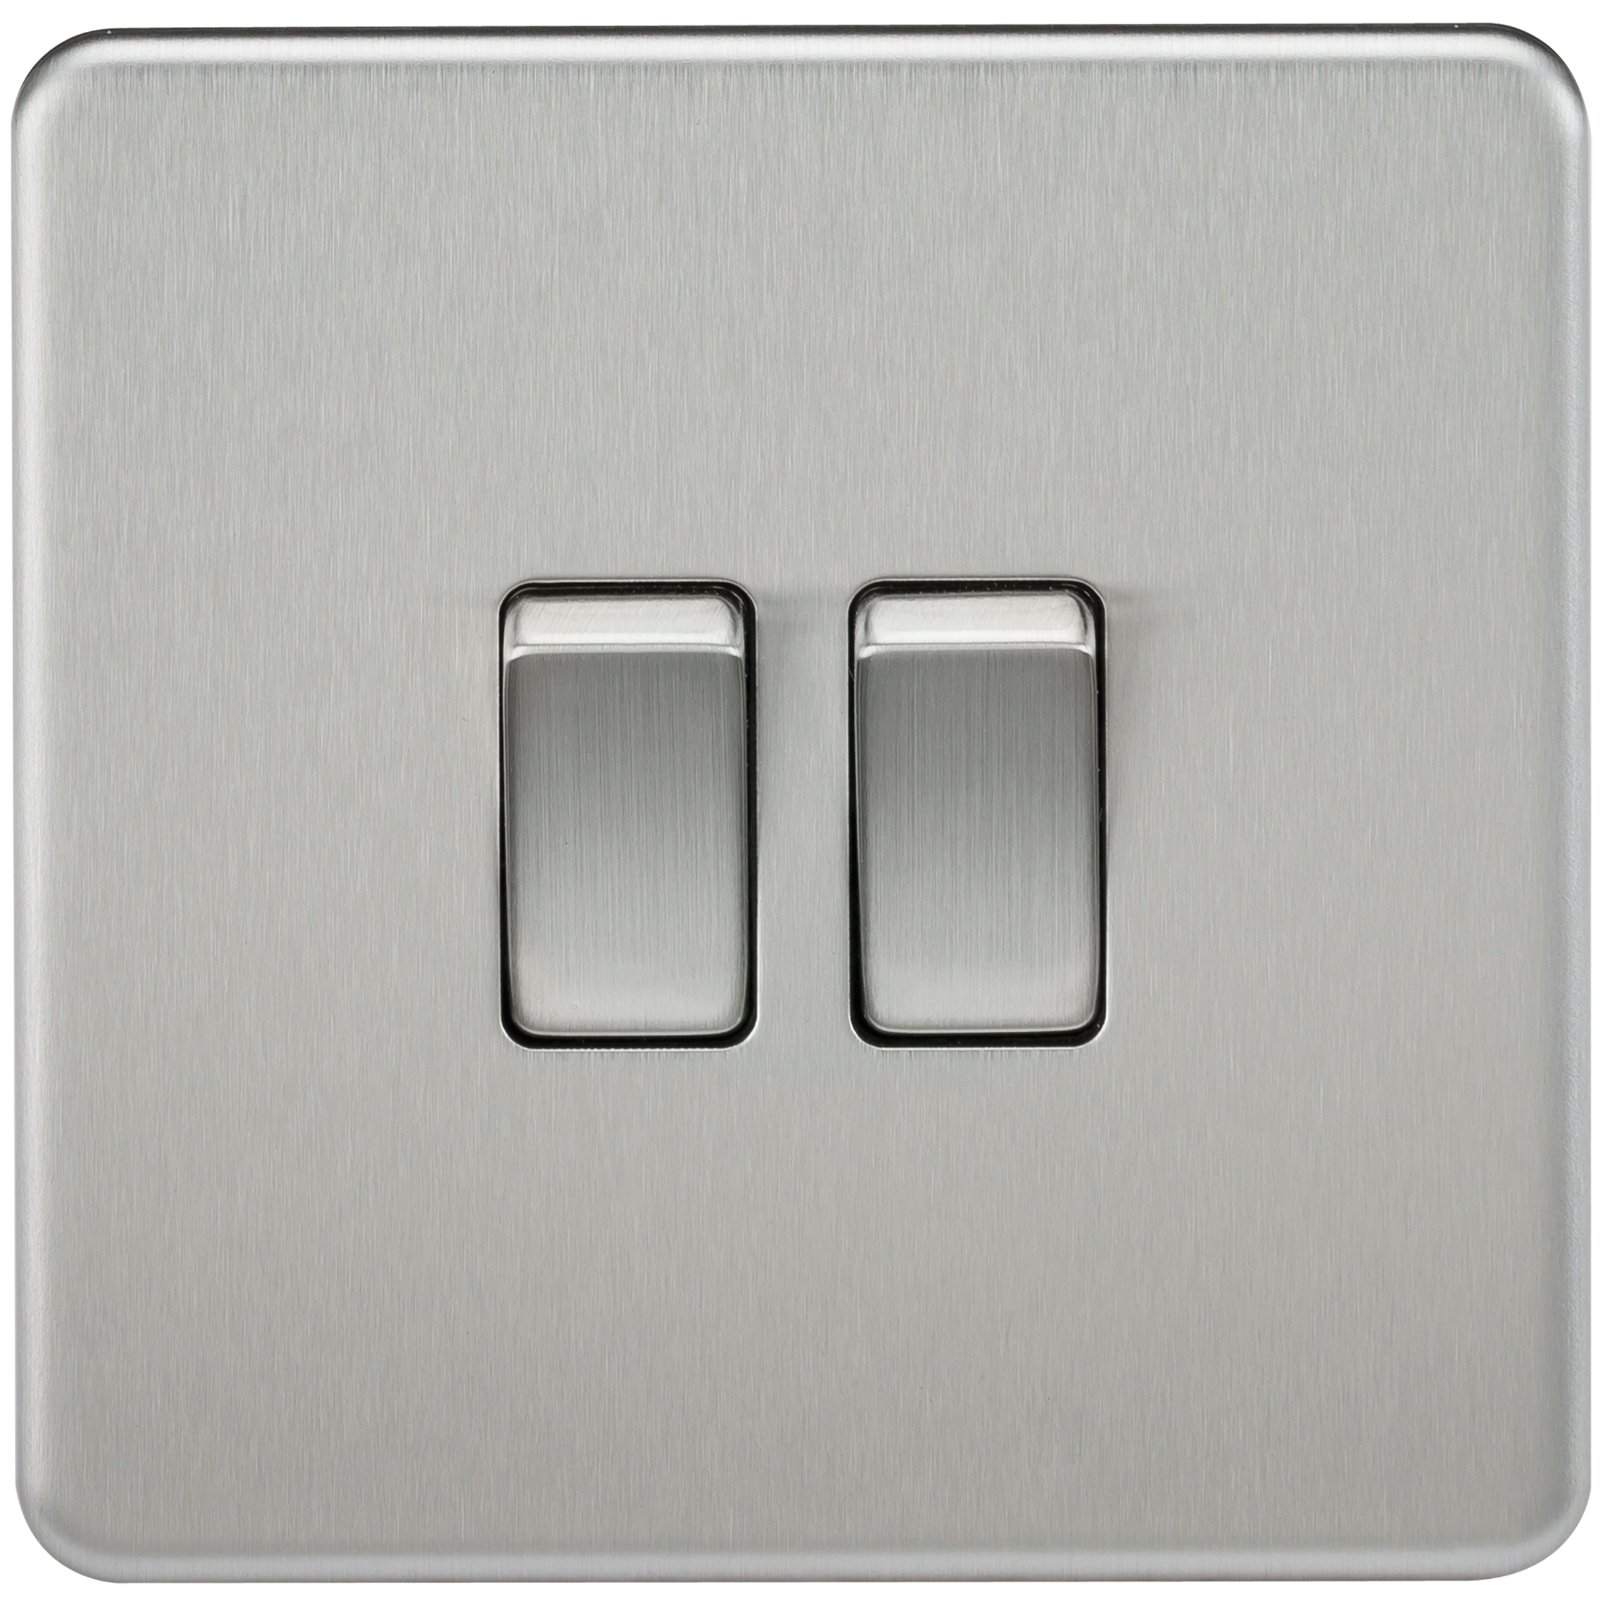 Screwless 10A 2G 2-Way Switch - Brushed Chrome - SF3000BC 